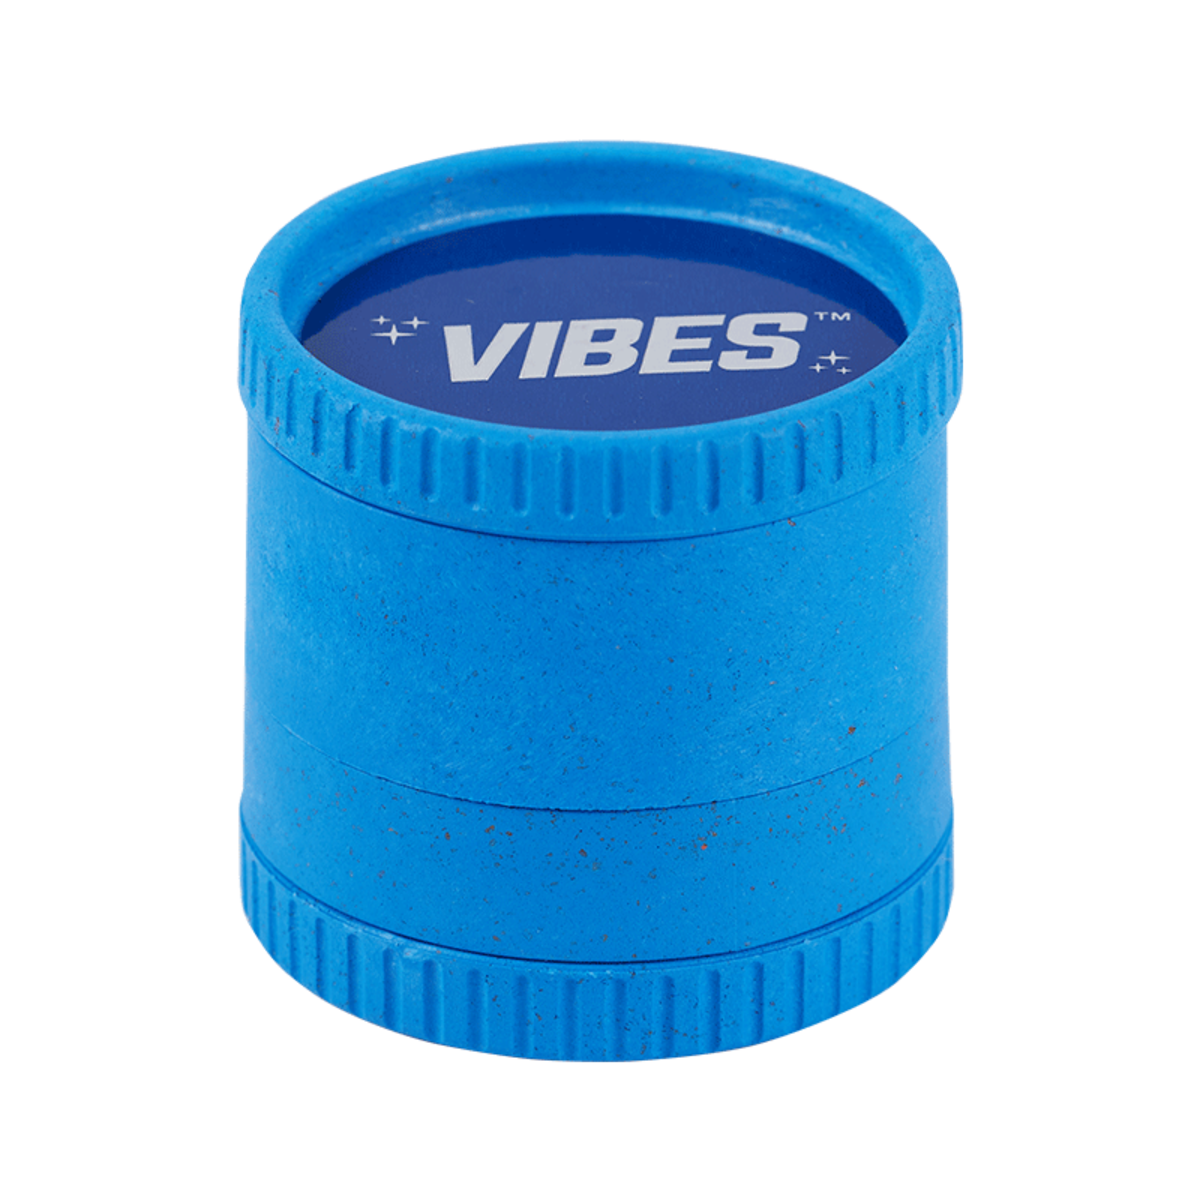 Vibes X Santa Cruz Shredder 4-Piece Hemp Grinder Blue. The Vibes™ X Santa Cruz Shredder 4-Piece Hemp Grinder is a Biodegradable Grinder Made From 100% Natural Hemp. This Durable Grinder Sports a Patented-Tooth Design that Delivers a Remarkably Even and Fluffy Grind. MOST DIVERSE CBD CONCENTRATE COLLECTION ON THE WEB. Top Shelf CBD Hemp Flower. Dab, Vape, Smoke Accessories - Sauce Warehouse